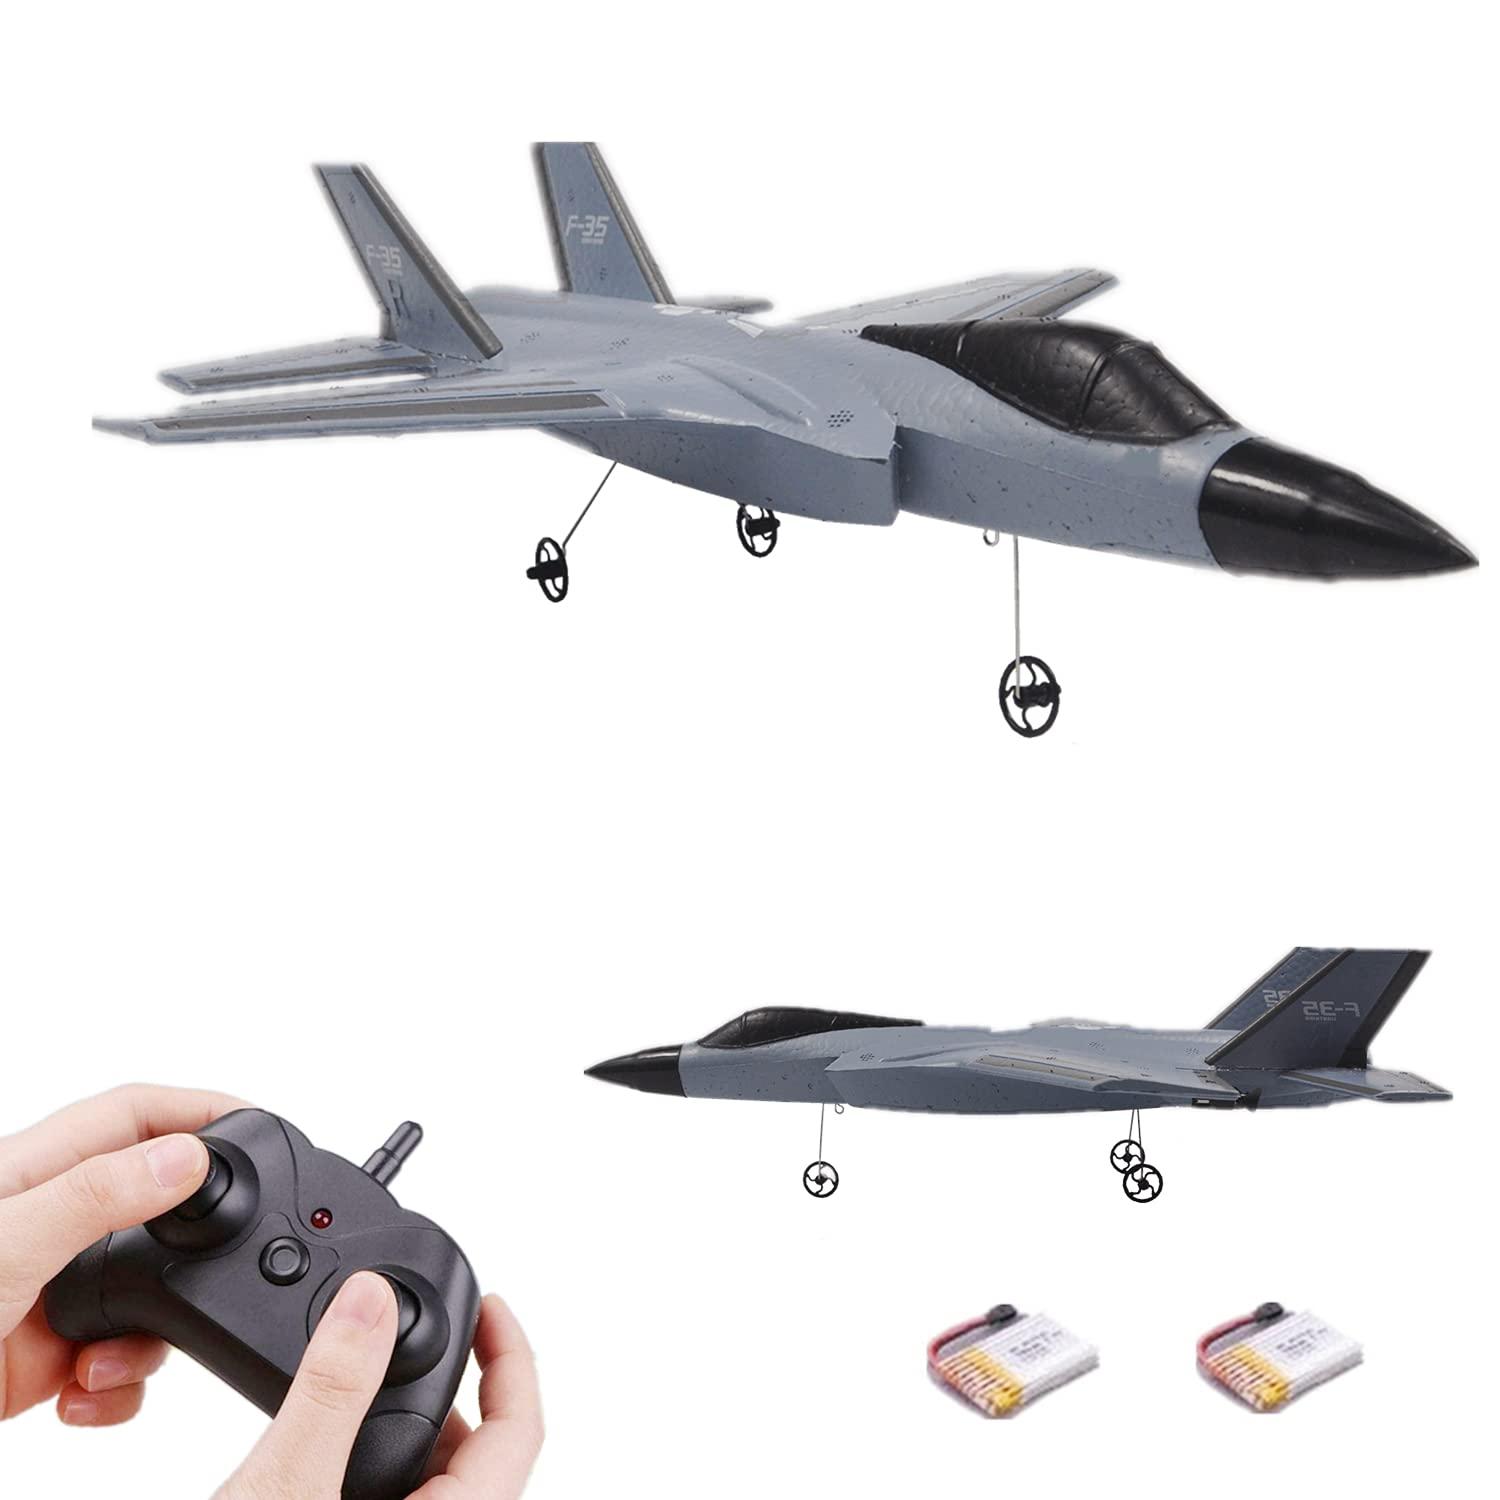 Flying Airplane With Remote Control: Stay Safe While Flying Airplanes with Remote Control